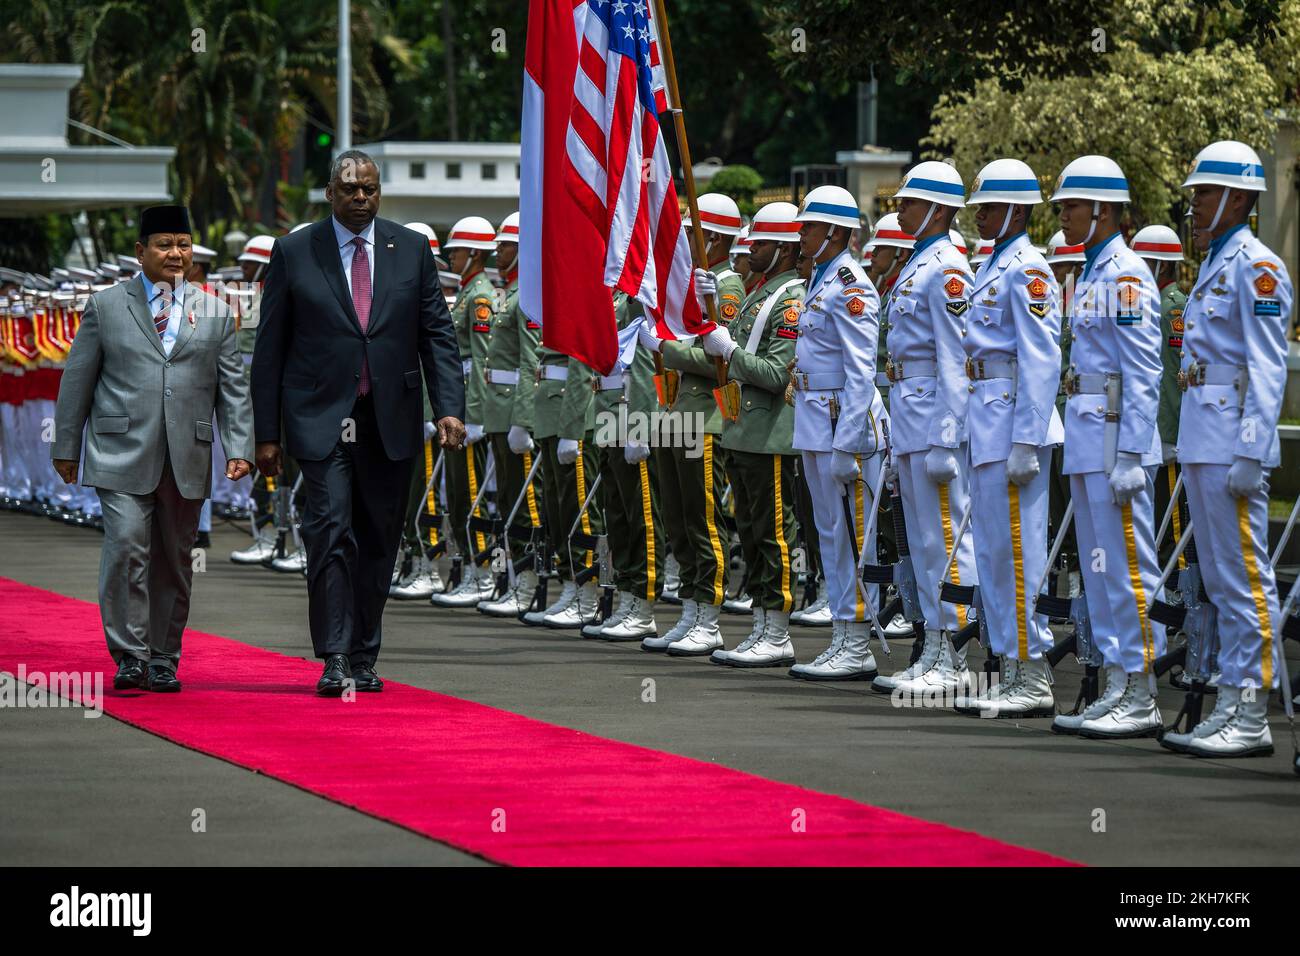 Jakarta, Indonesia. 21 November, 2022. U.S. Secretary of Defense Lloyd J. Austin III, right, is escorted by Indonesian Defense Minister Prabowo Subianto for the troop review during the arrival ceremony at the Ministry of Defense building, November 21, 2022 in Jakarta, Indonesia. Credit: Chad J. McNeeley/DOD/Alamy Live News Stock Photo